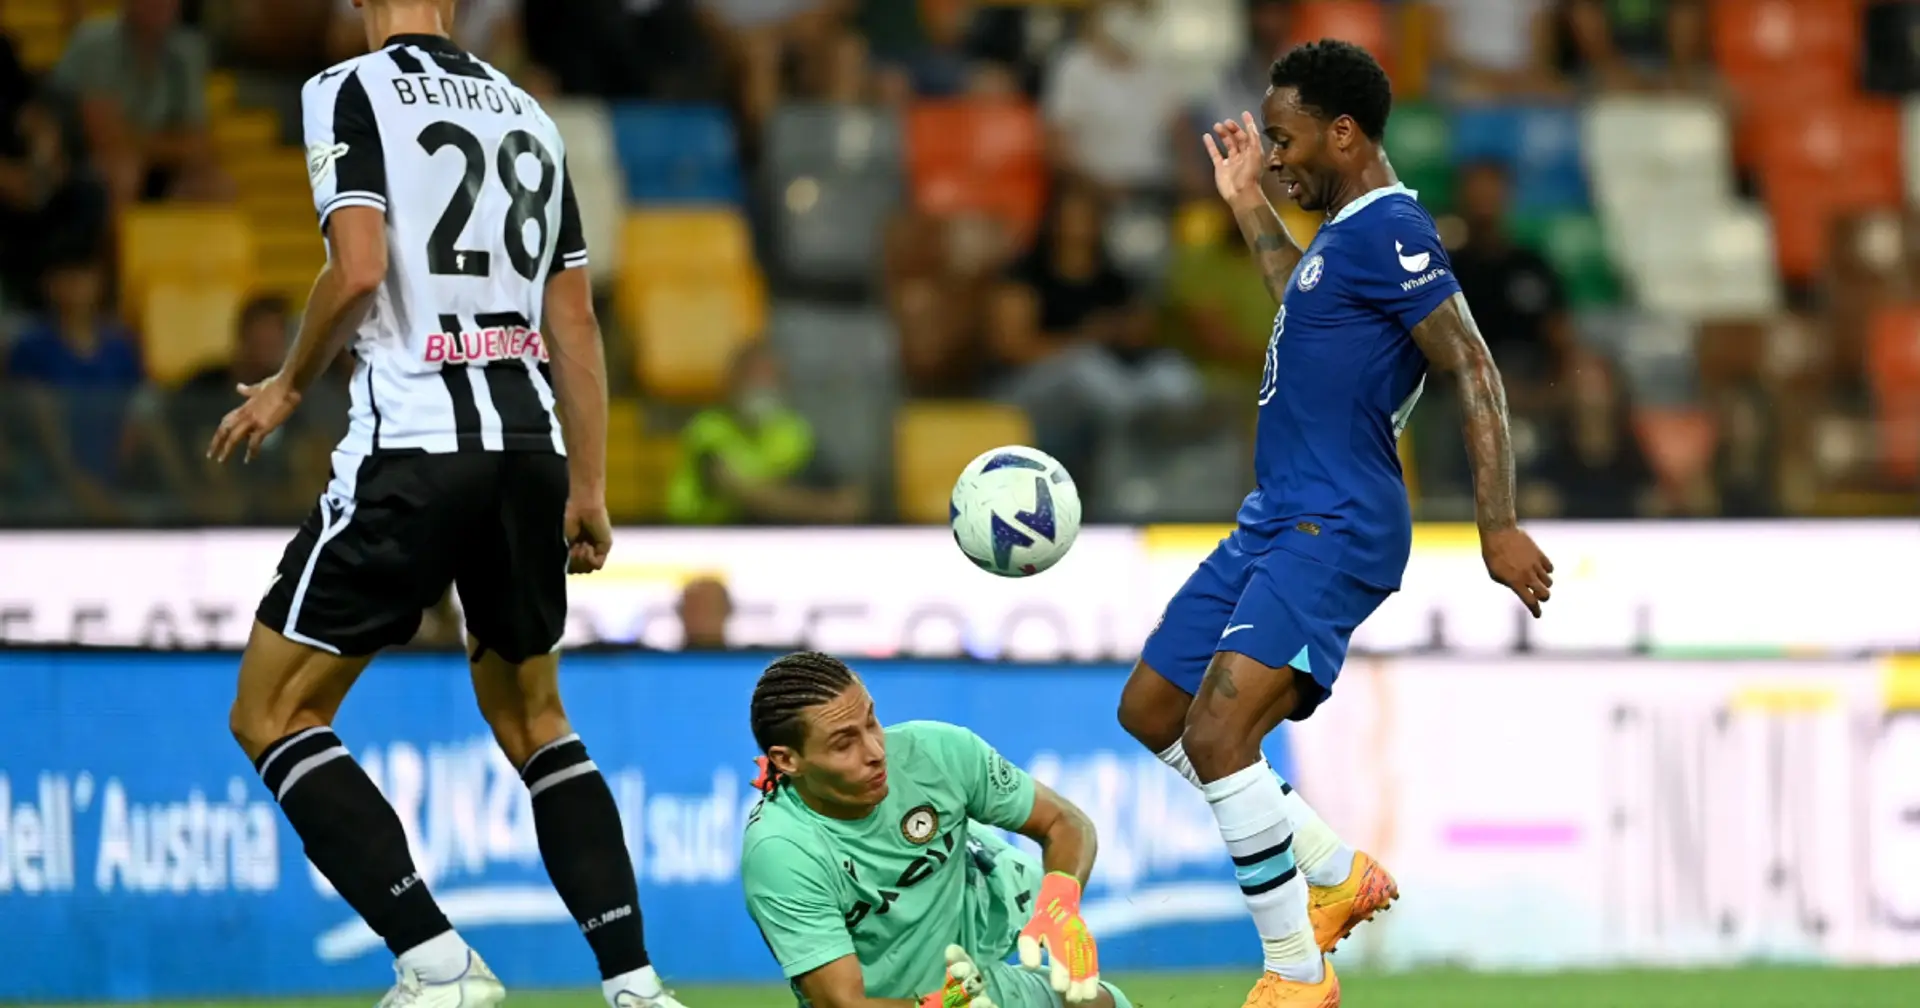 Chelsea defeat Udinese in friendly & 3 more big stories you might've missed